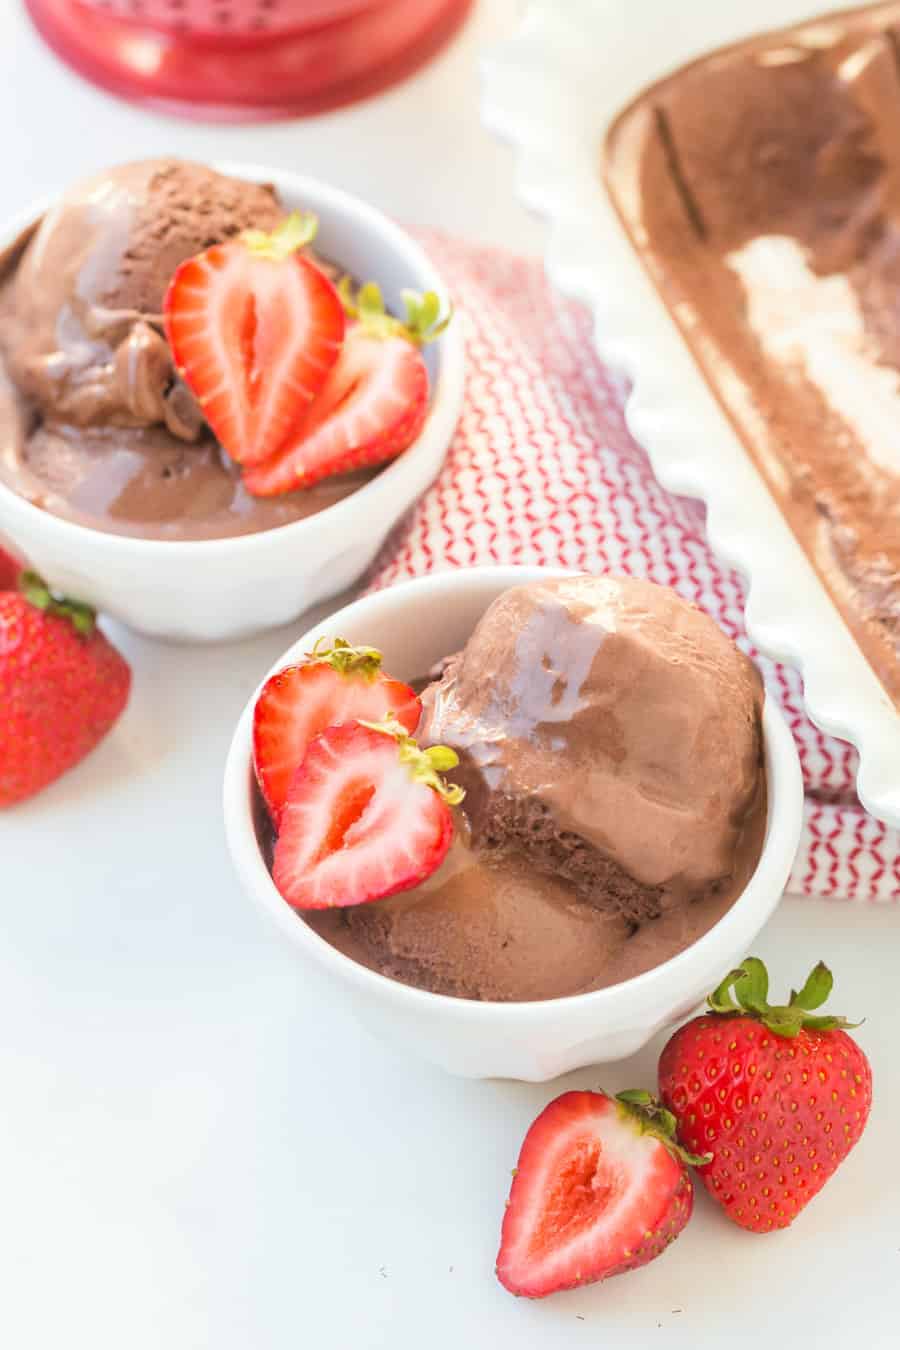 This homemade dark chocolate ice cream is so creamy and luxurious that you'll never go back to the store-bought kind! #icecream #chocolateicecream #icecreamrecipe #homemadeicecream #darkchocolate